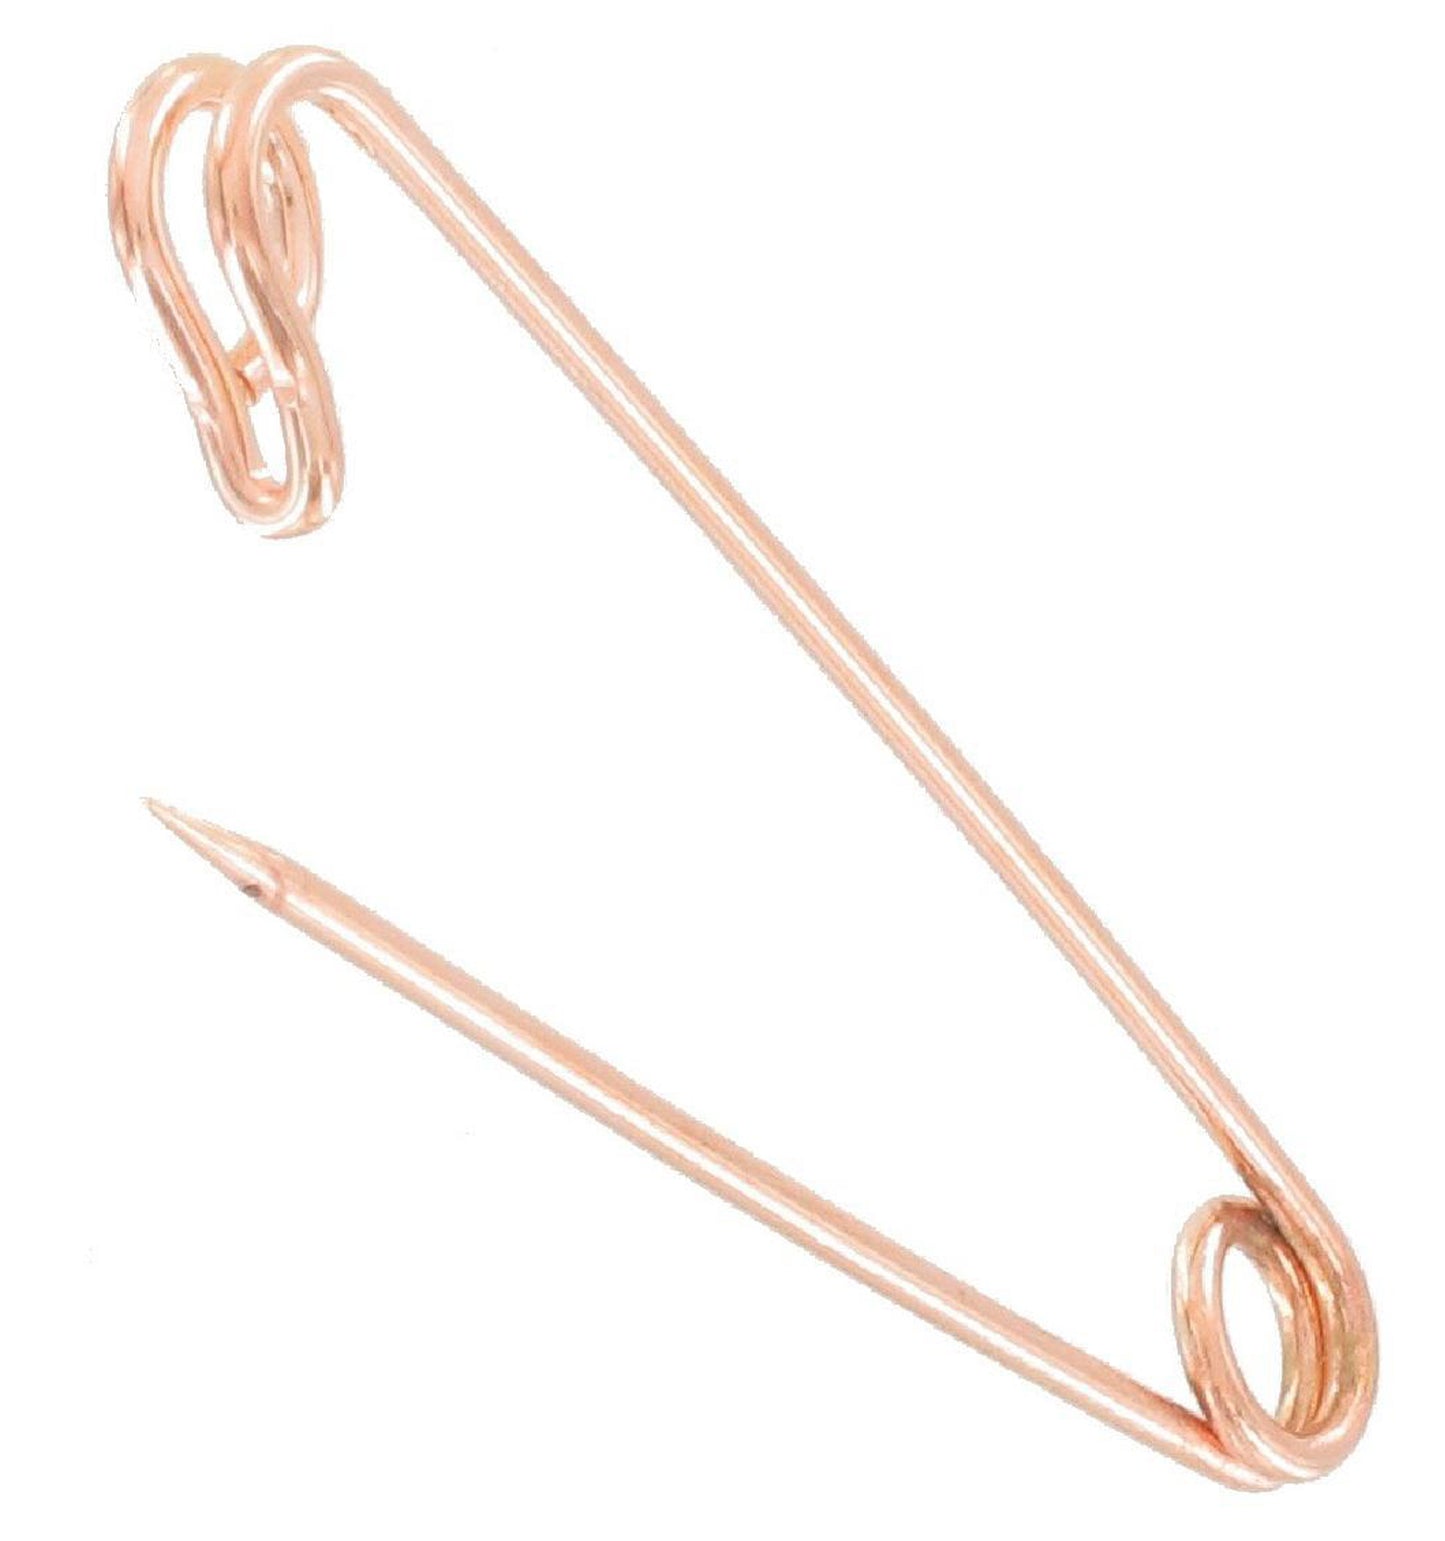 USA Rose Gold Tone Safety Pin Brooch Nautical Anchor Charm Fashion Jewelry 2"